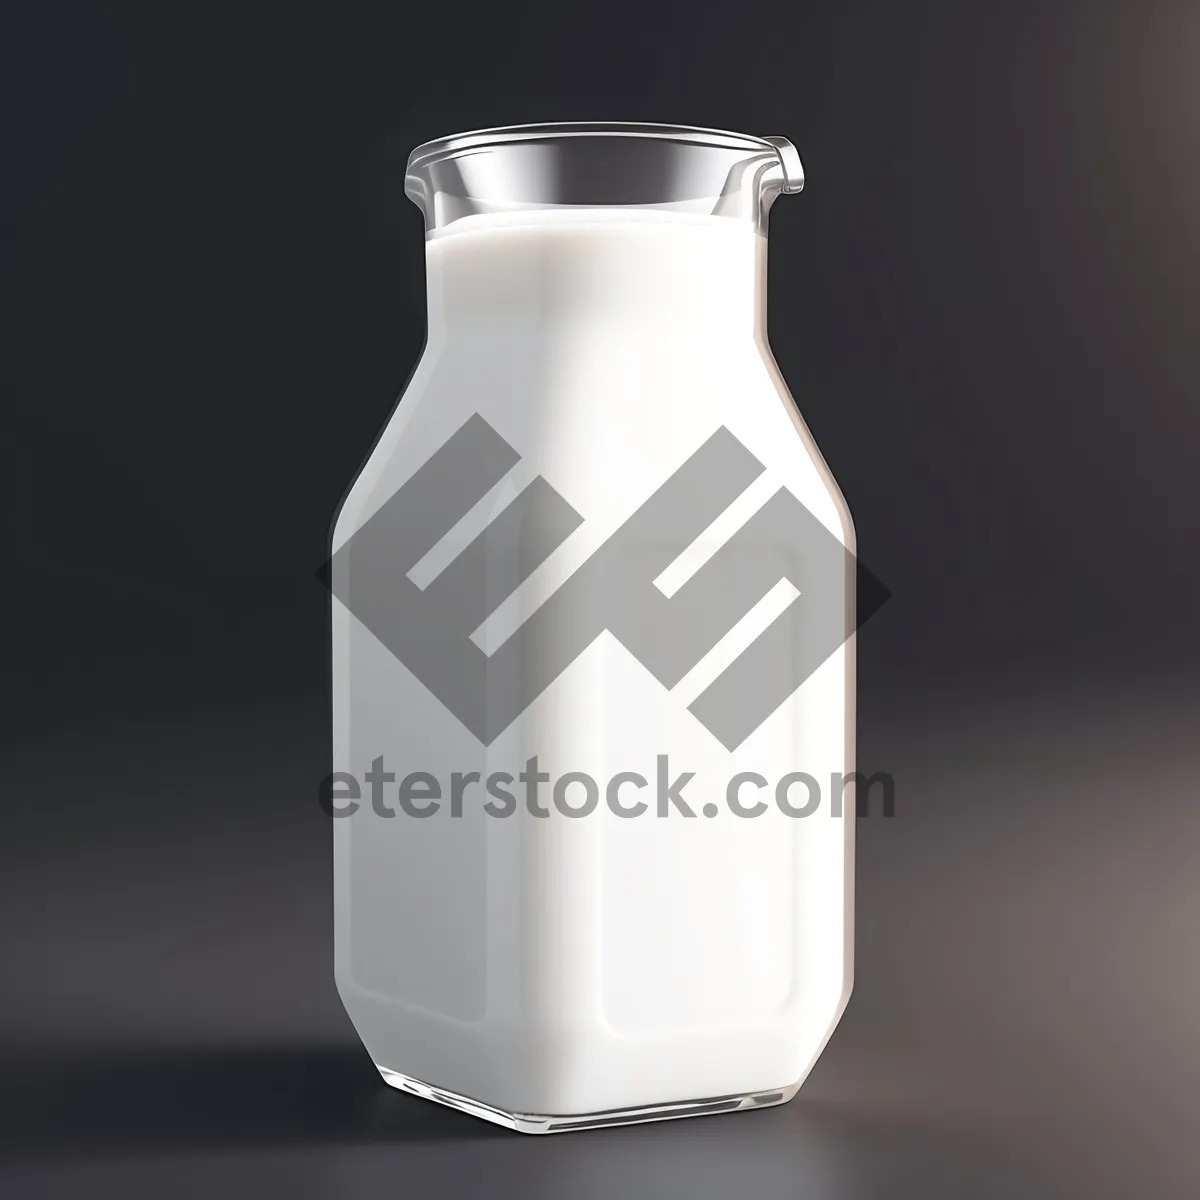 Picture of Transparent Glass Milk Bottle with Label